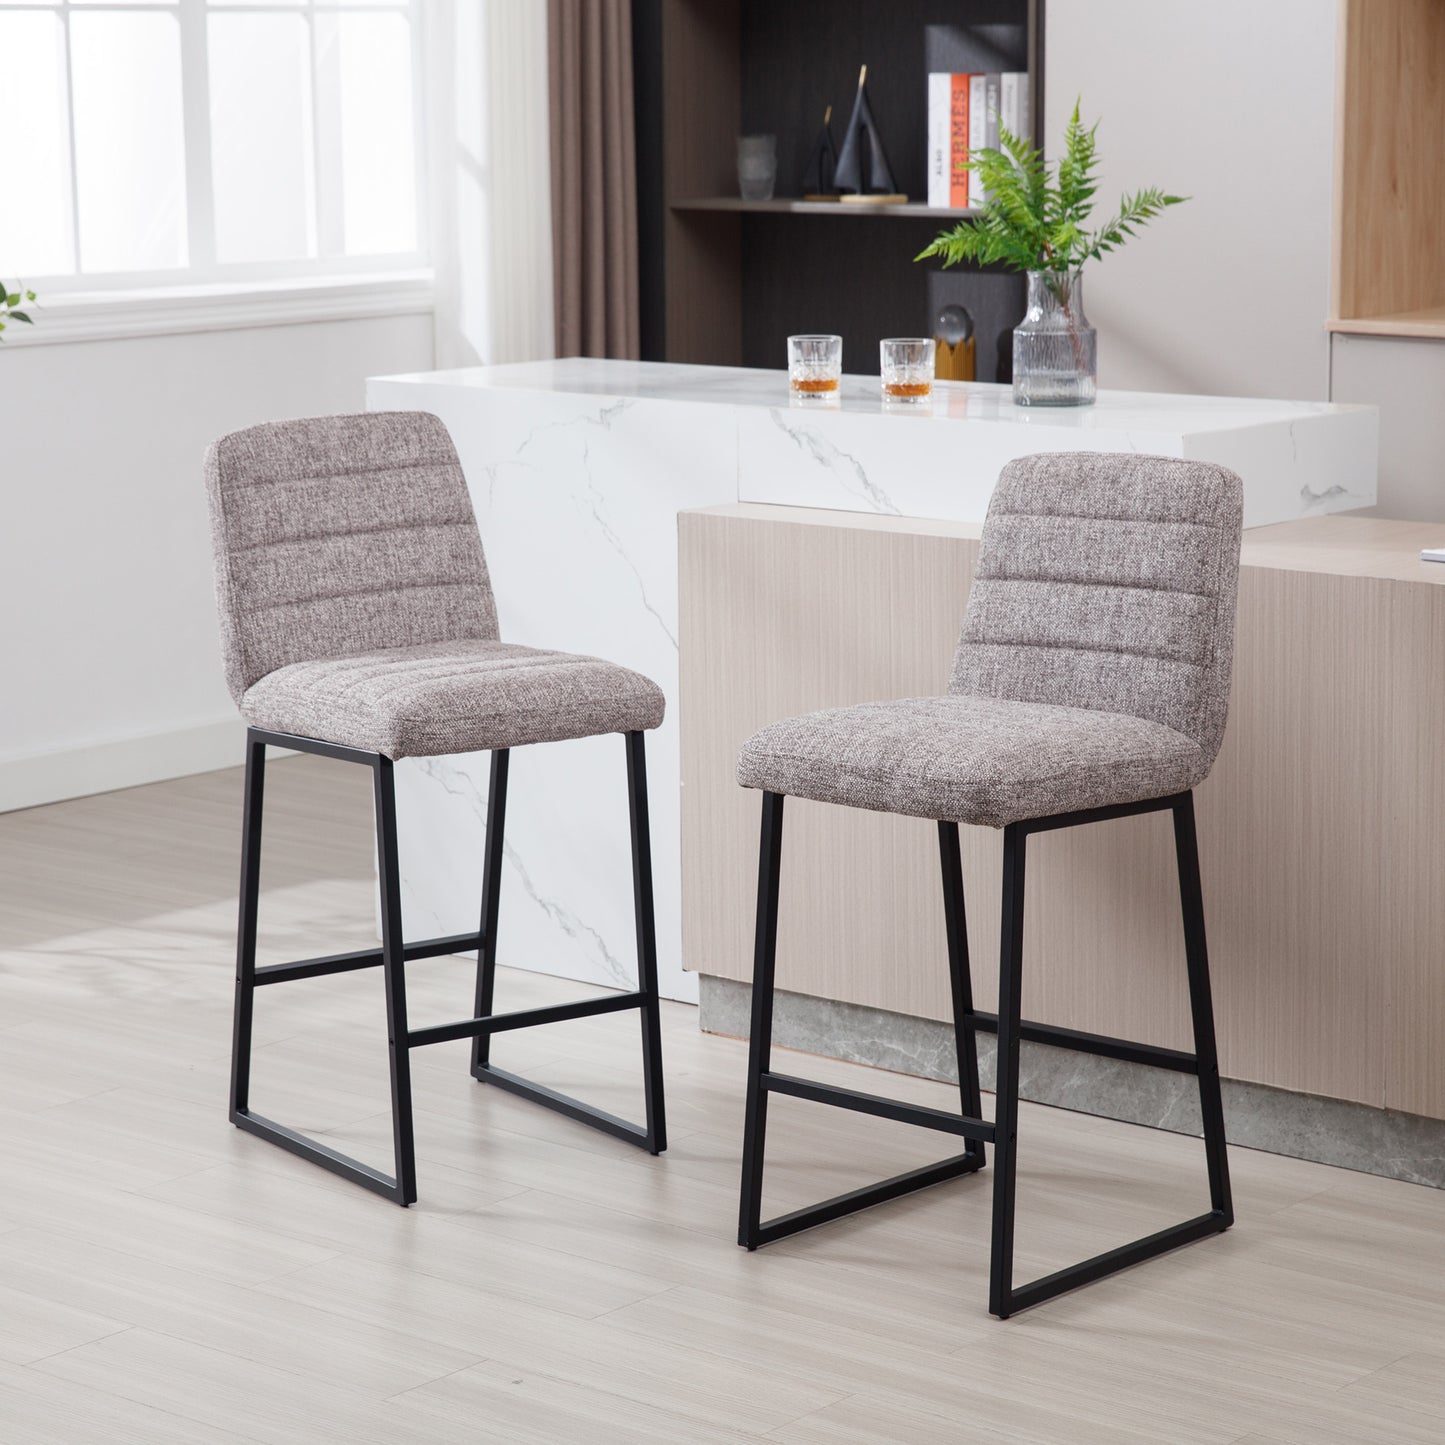 Low Bar Stools Set of 2 Bar Chairs for Living Room Party Room Kitchen,Upholstered Linen Fabric Kitchen Breakfast Bar Stools with Footrest,Coffee